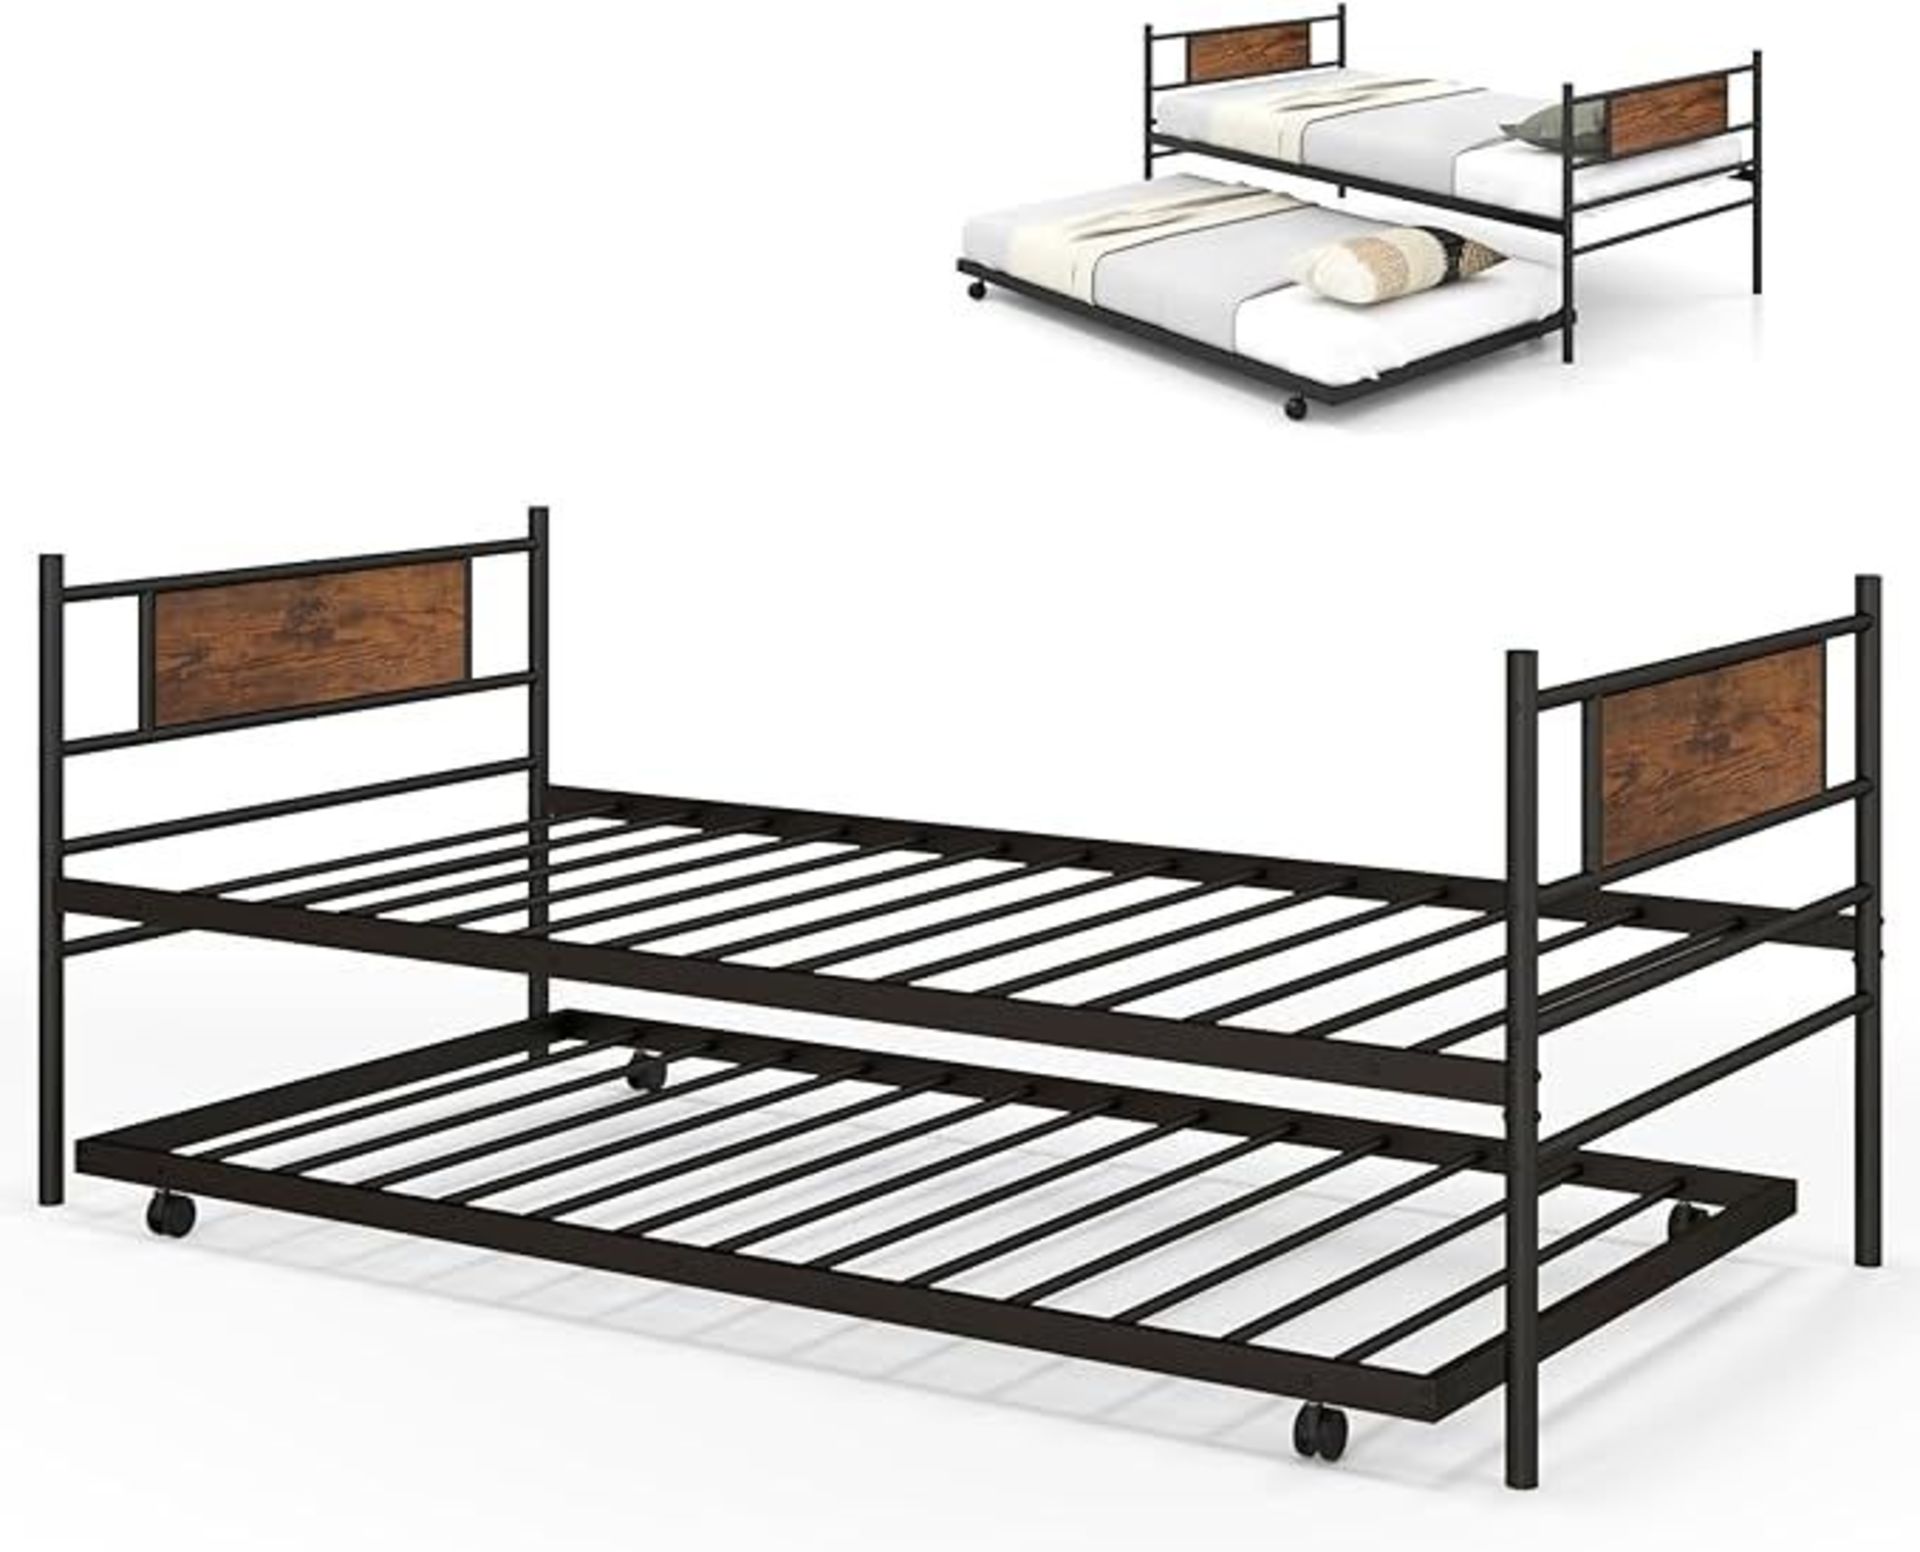 Multigot 2 in 1 Single Bed Frame, 3FT Pull-out Day Bed with Trundle Bed, Industrial Metal Frame